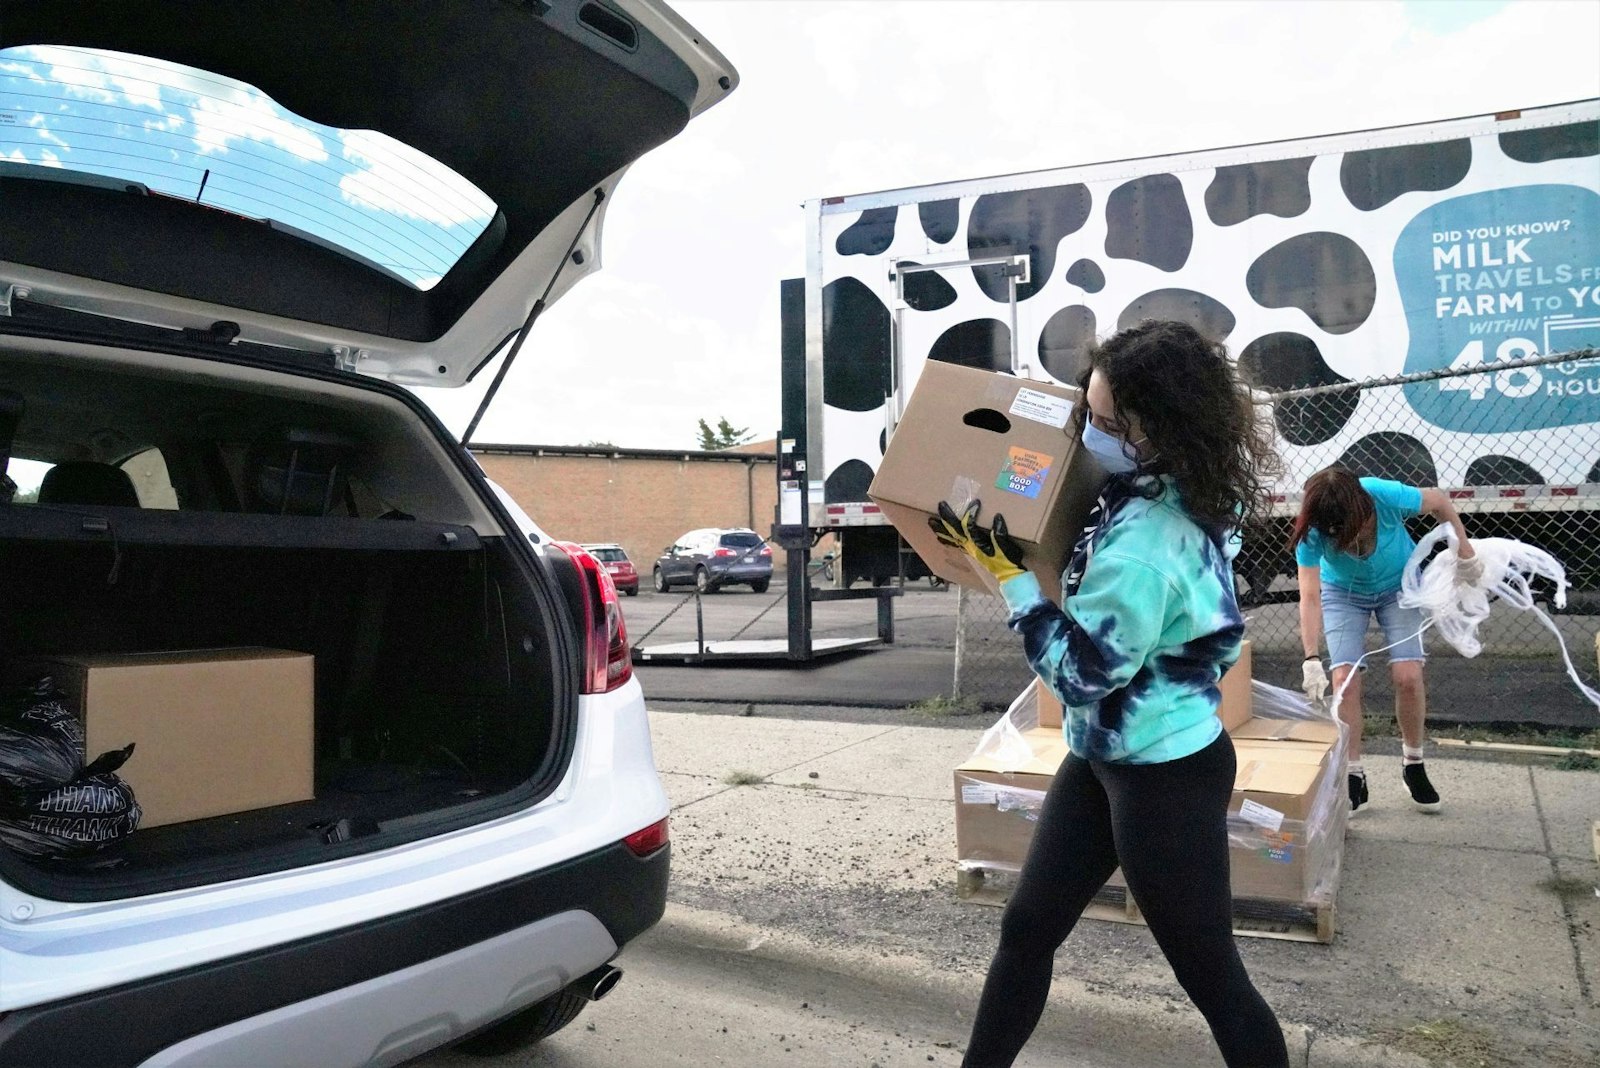 A Gleaners volunteer loads boxes of food into a vehicle during a distribution event in River Rouge. Across the board, Gleaners has seen increases of 10% to 25% for basic grocery items, including dairy, produce and meat. (Courtesy of Gleaners Community Food Bank)